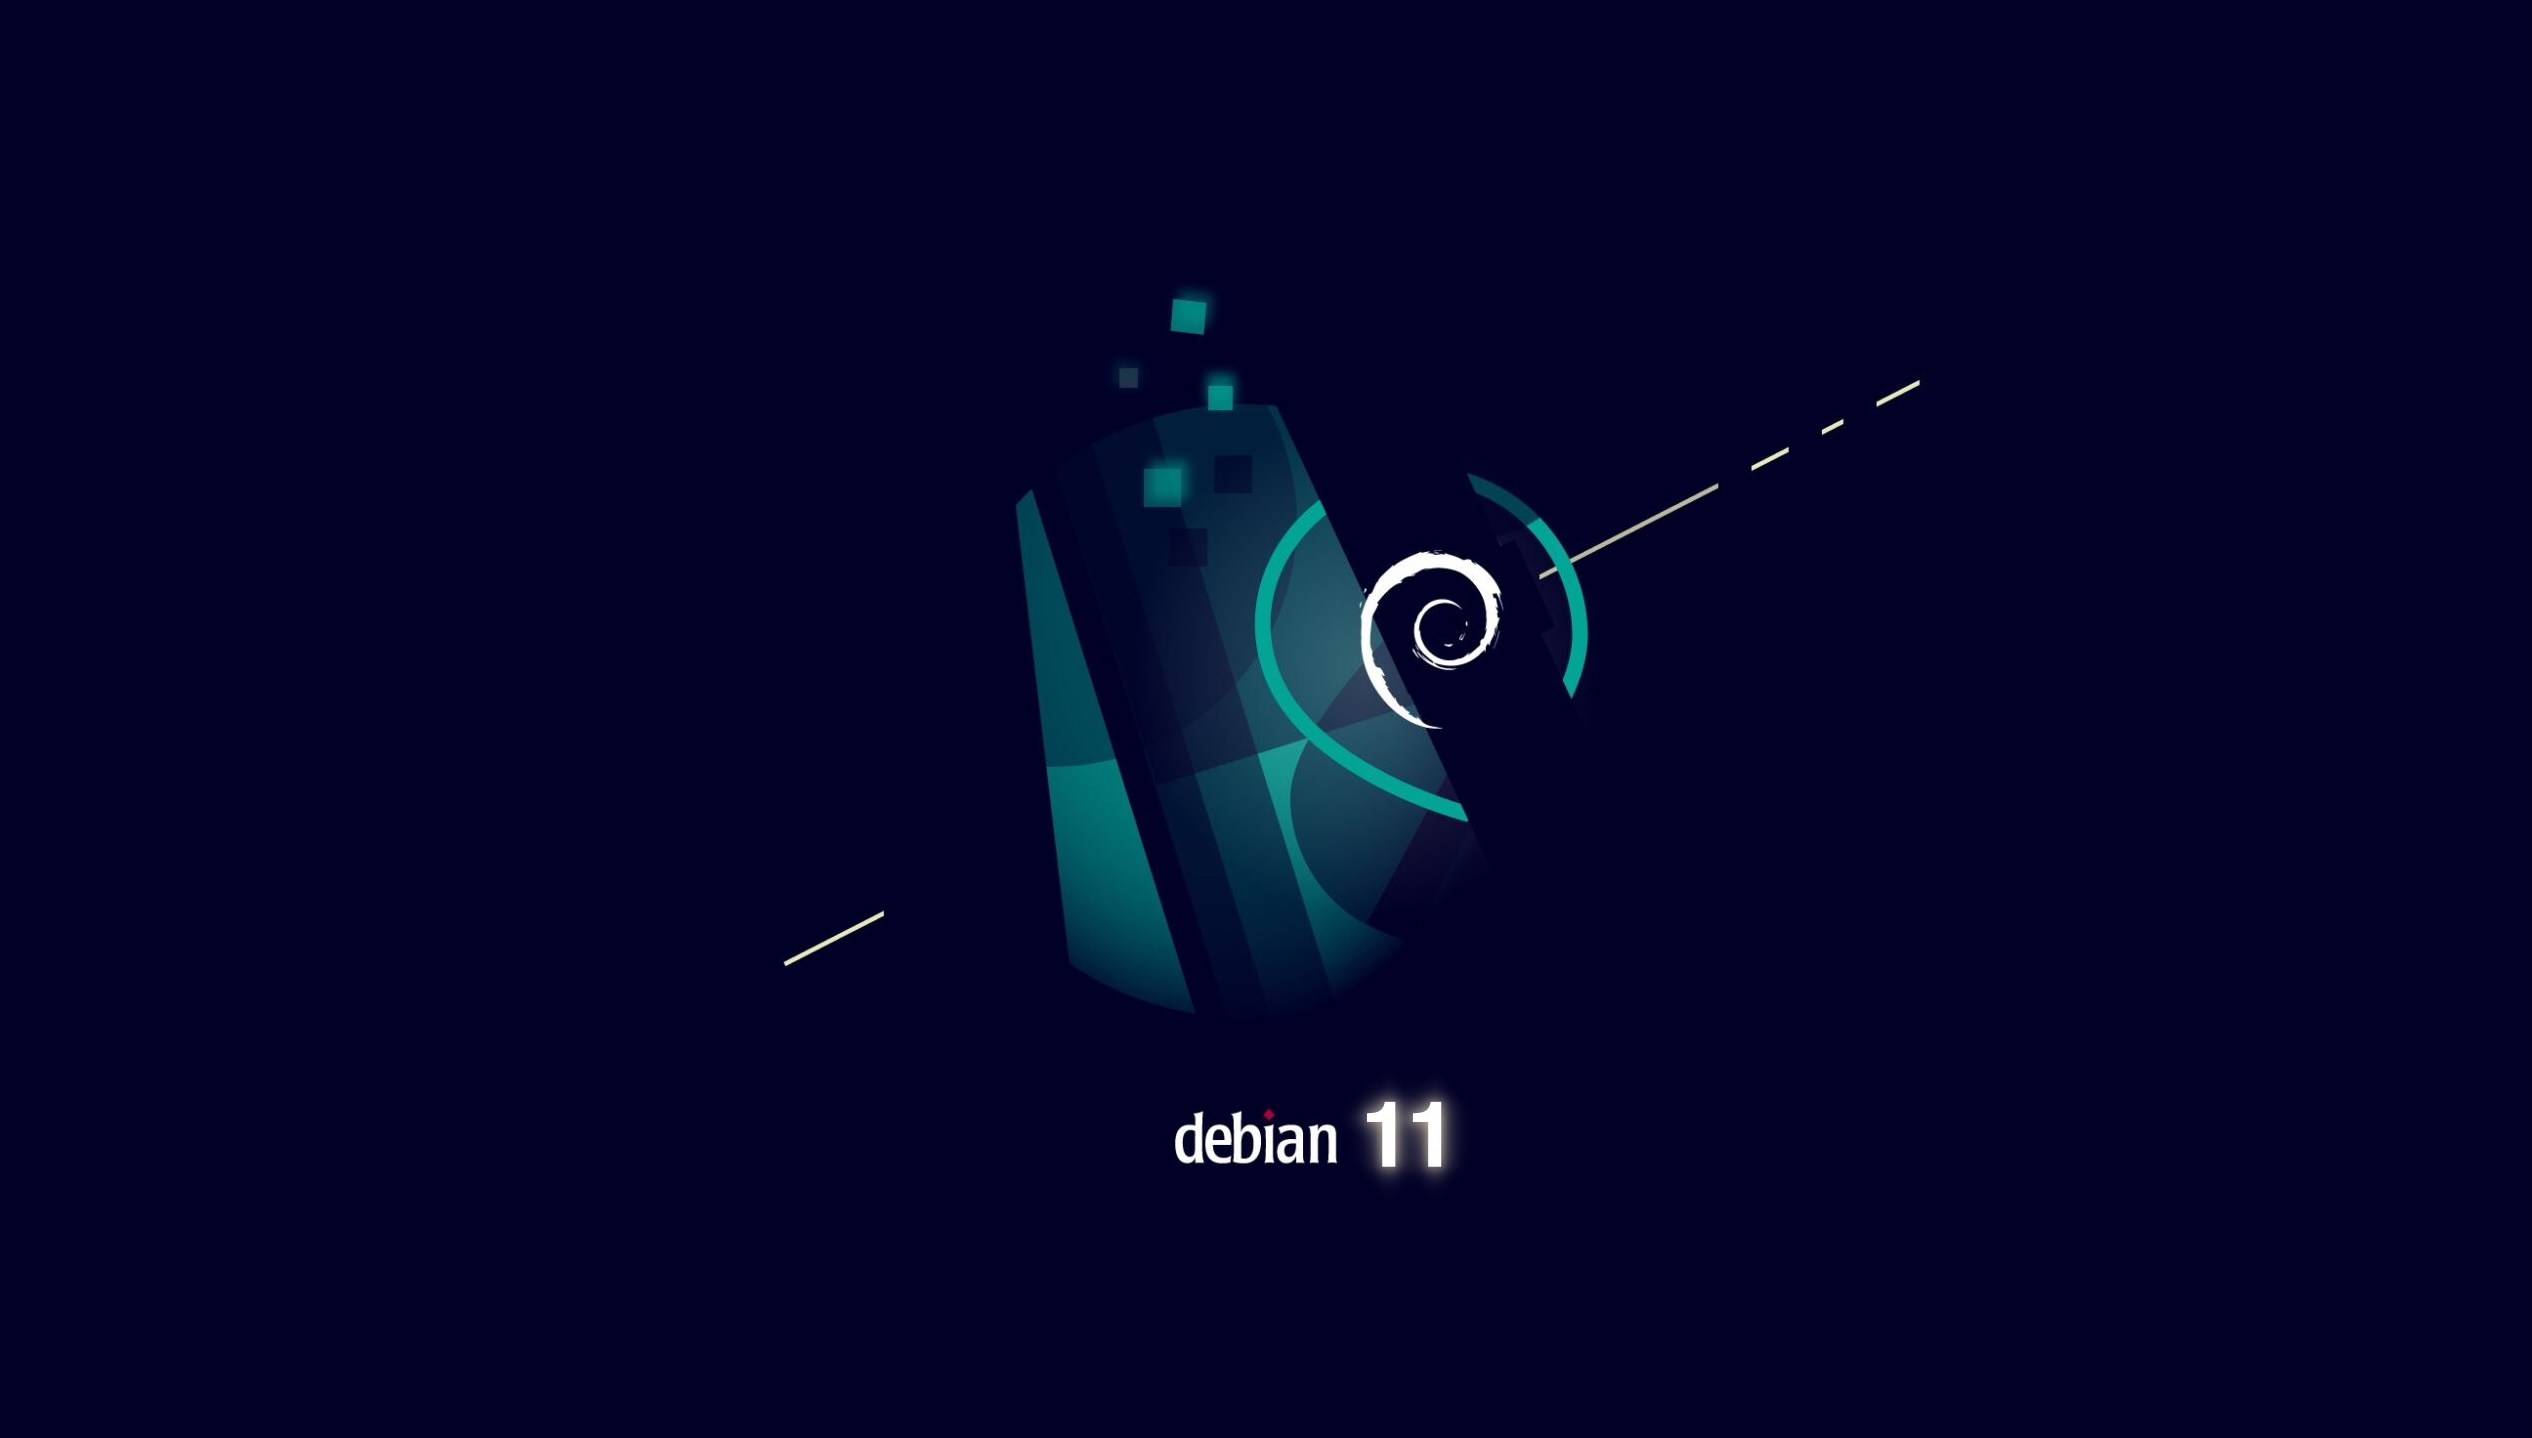 Debian 11 Bullseye Installer Release Candidate Switches to Linux 5.10 LTS, Adds Many Improvements